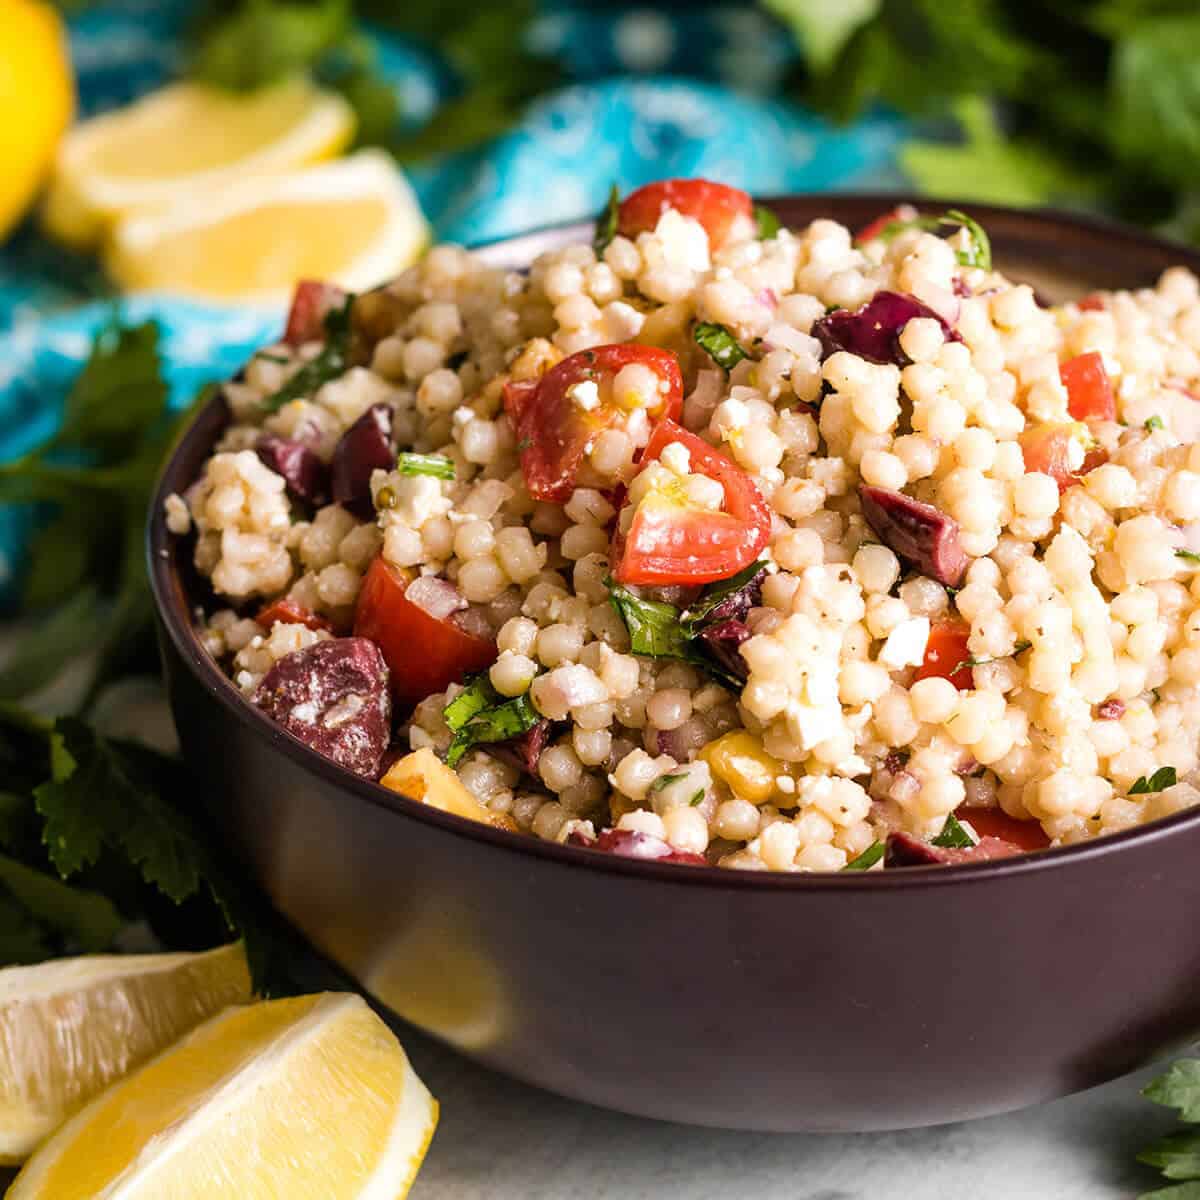 The lemon couscous salad served in brown bowl.